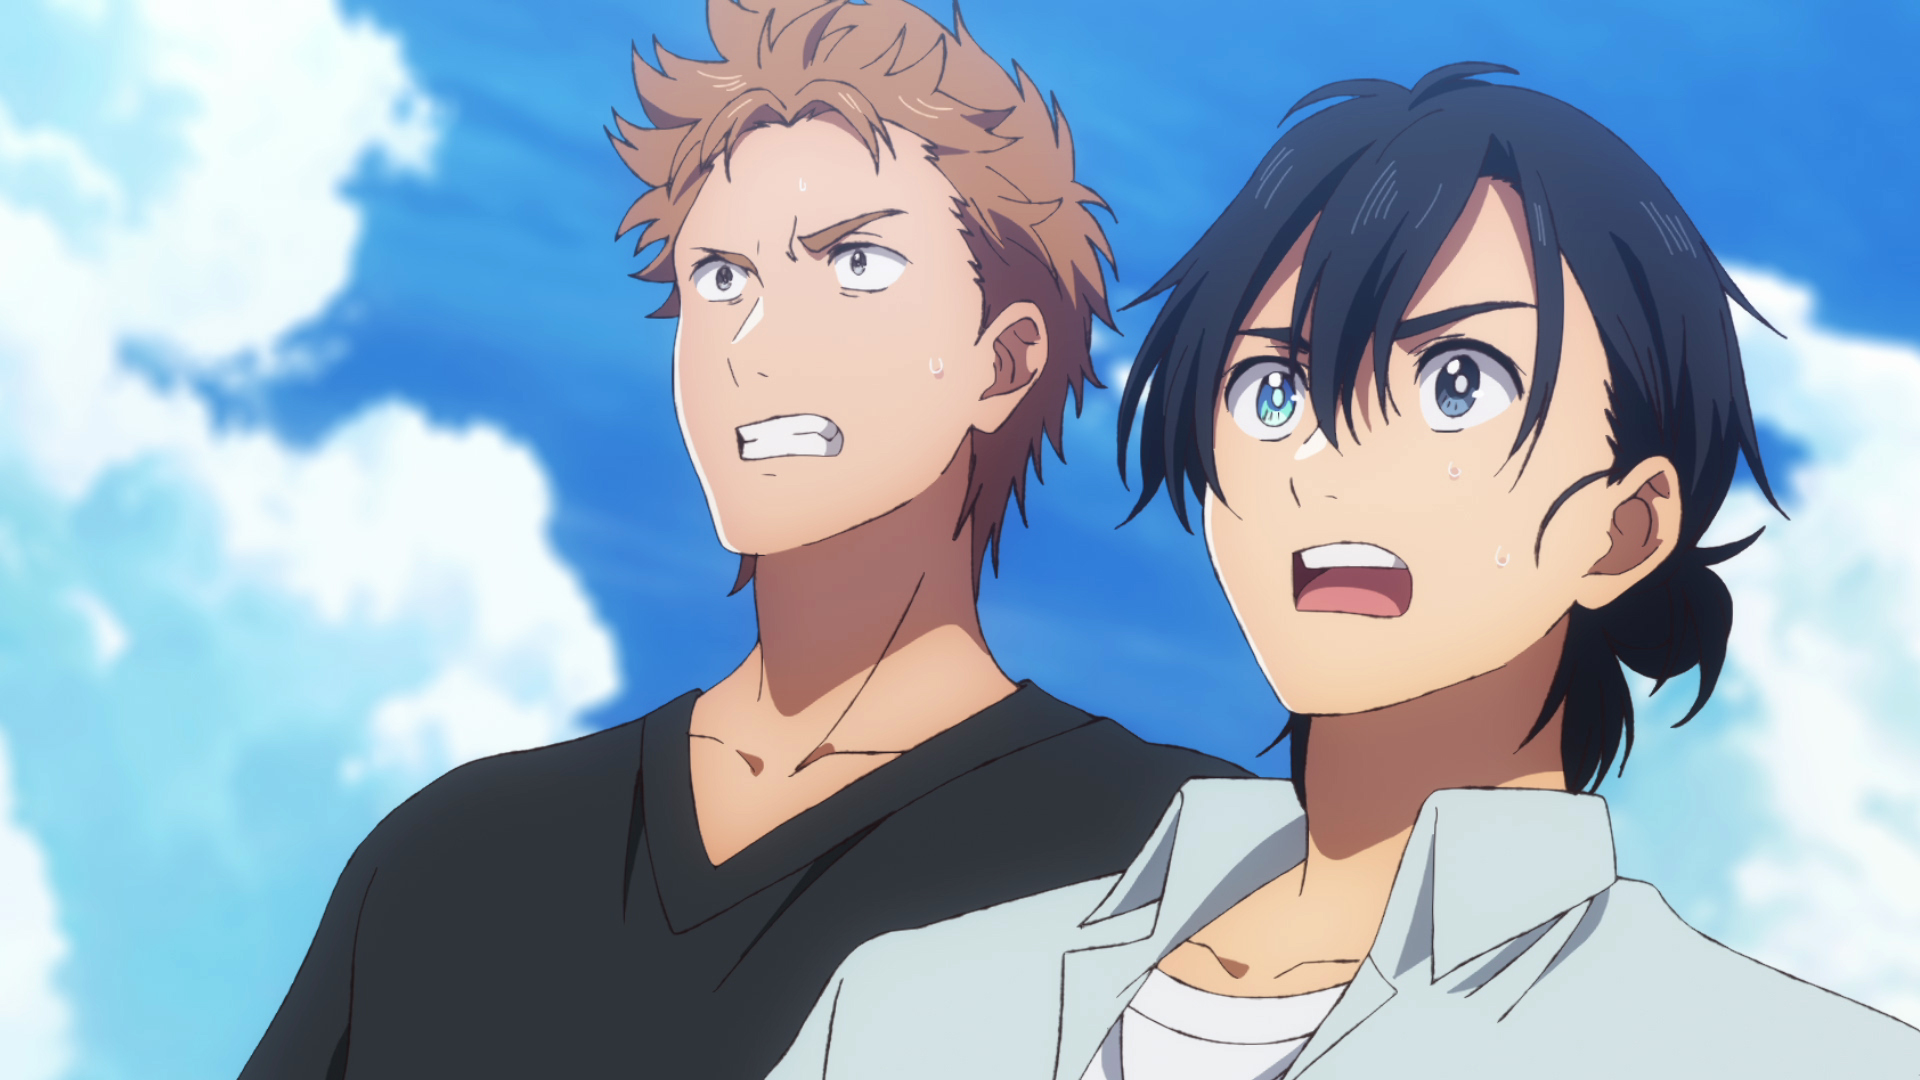 Summer Time Rendering Reveals Preview for Episode 14 - Anime Corner